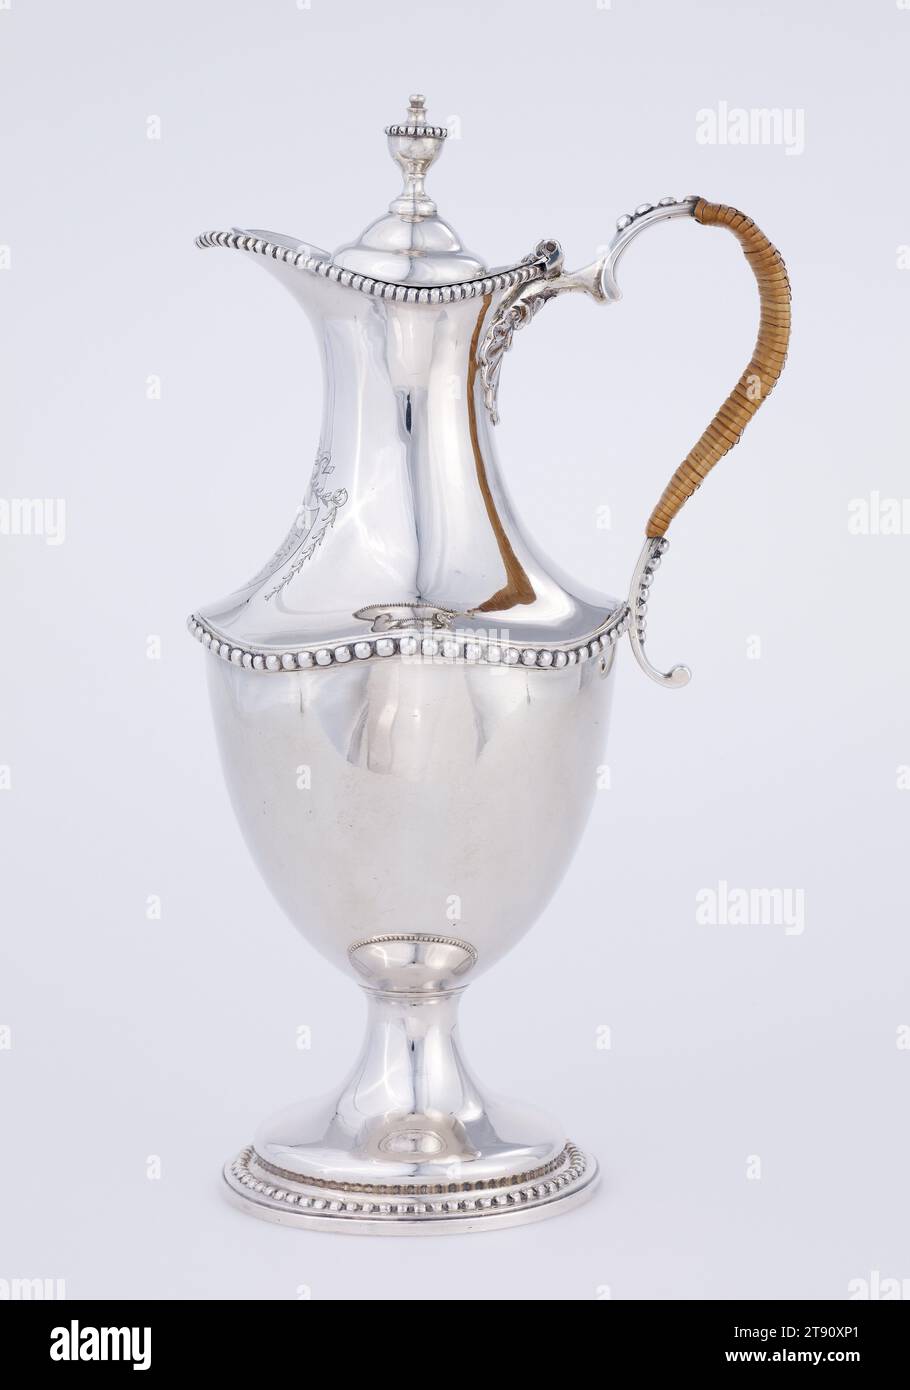 Covered jug, 1773-1774, Charles Wright, British, English, active c. 1754-1790, 12 x 7 x 5in. (30.5 x 17.8 x 12.7cm), Silver, rattan (replaced), England, 18th century Stock Photo